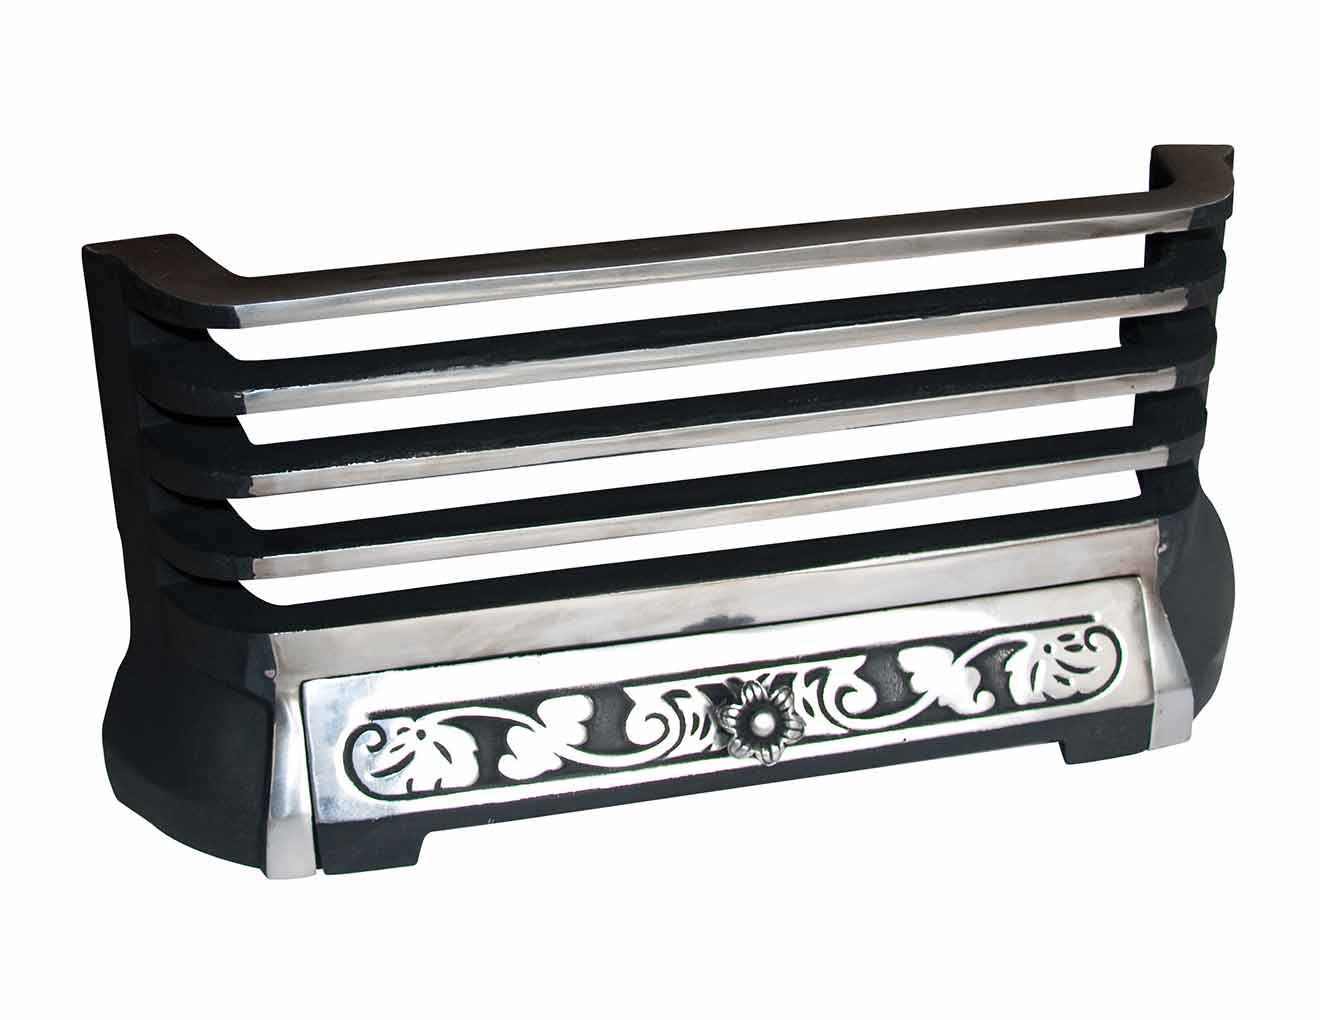 Chester Polished Front & Fret Fire Grate image